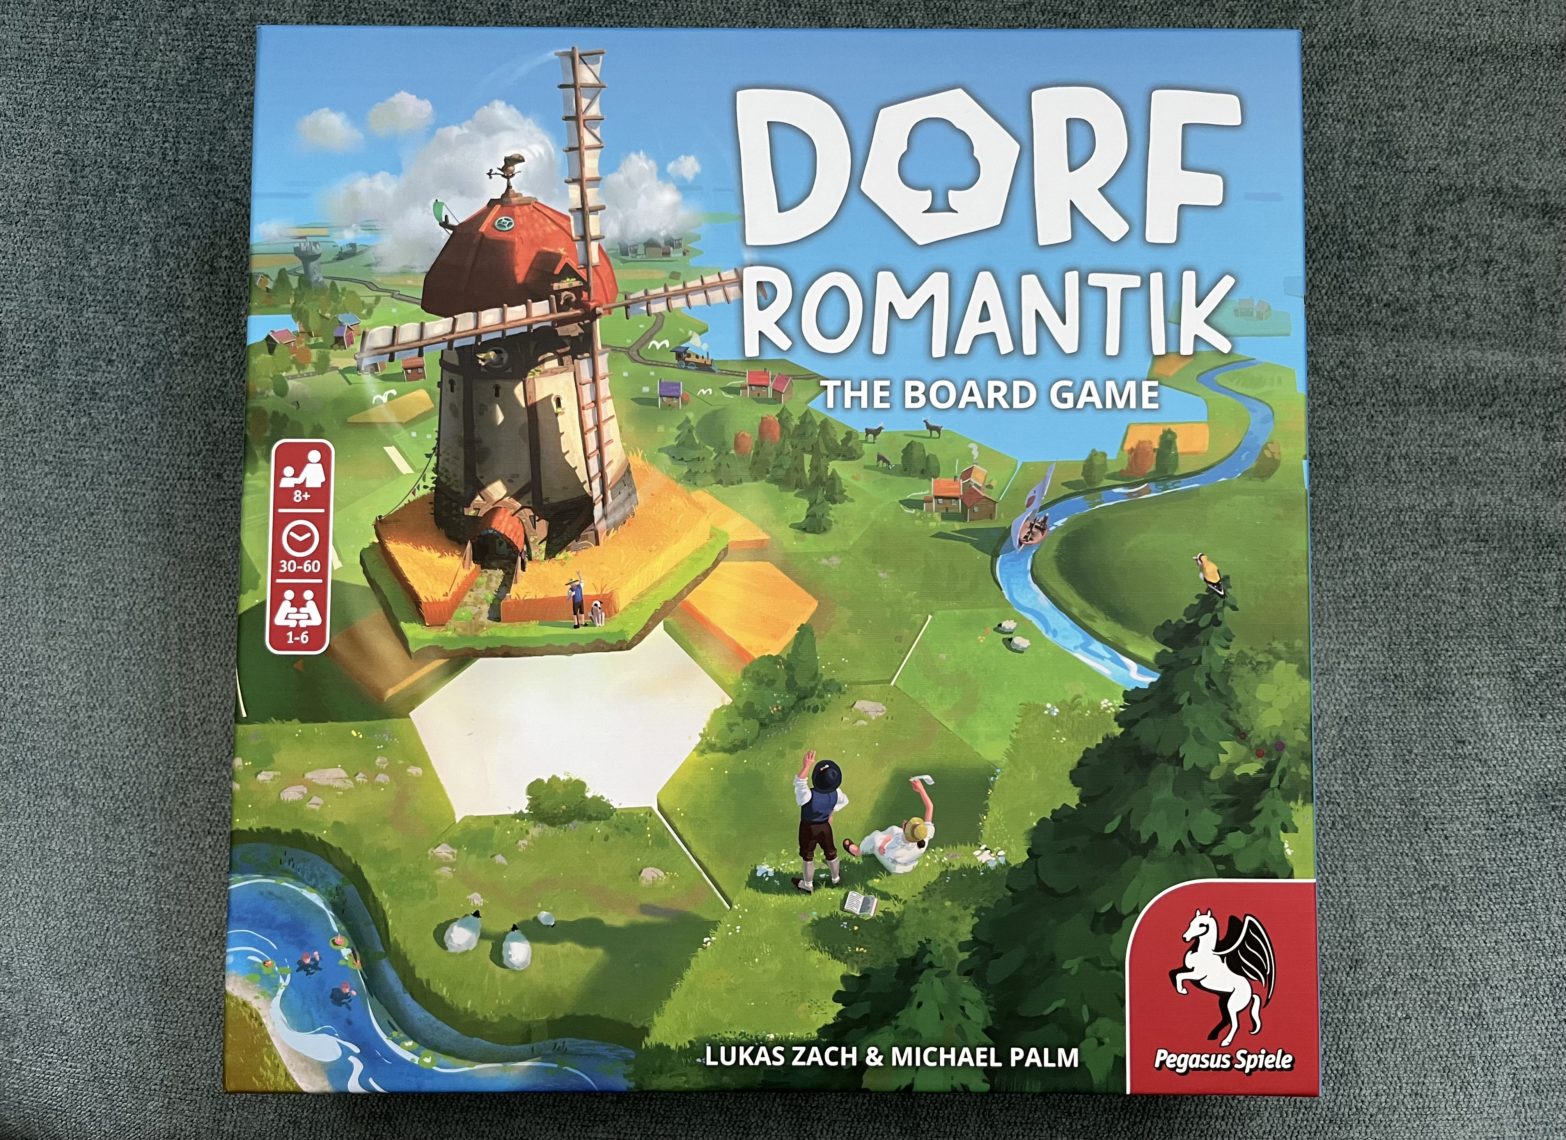 Top-down shot of Dorfromantik: The Board Game against a tourquoise background.